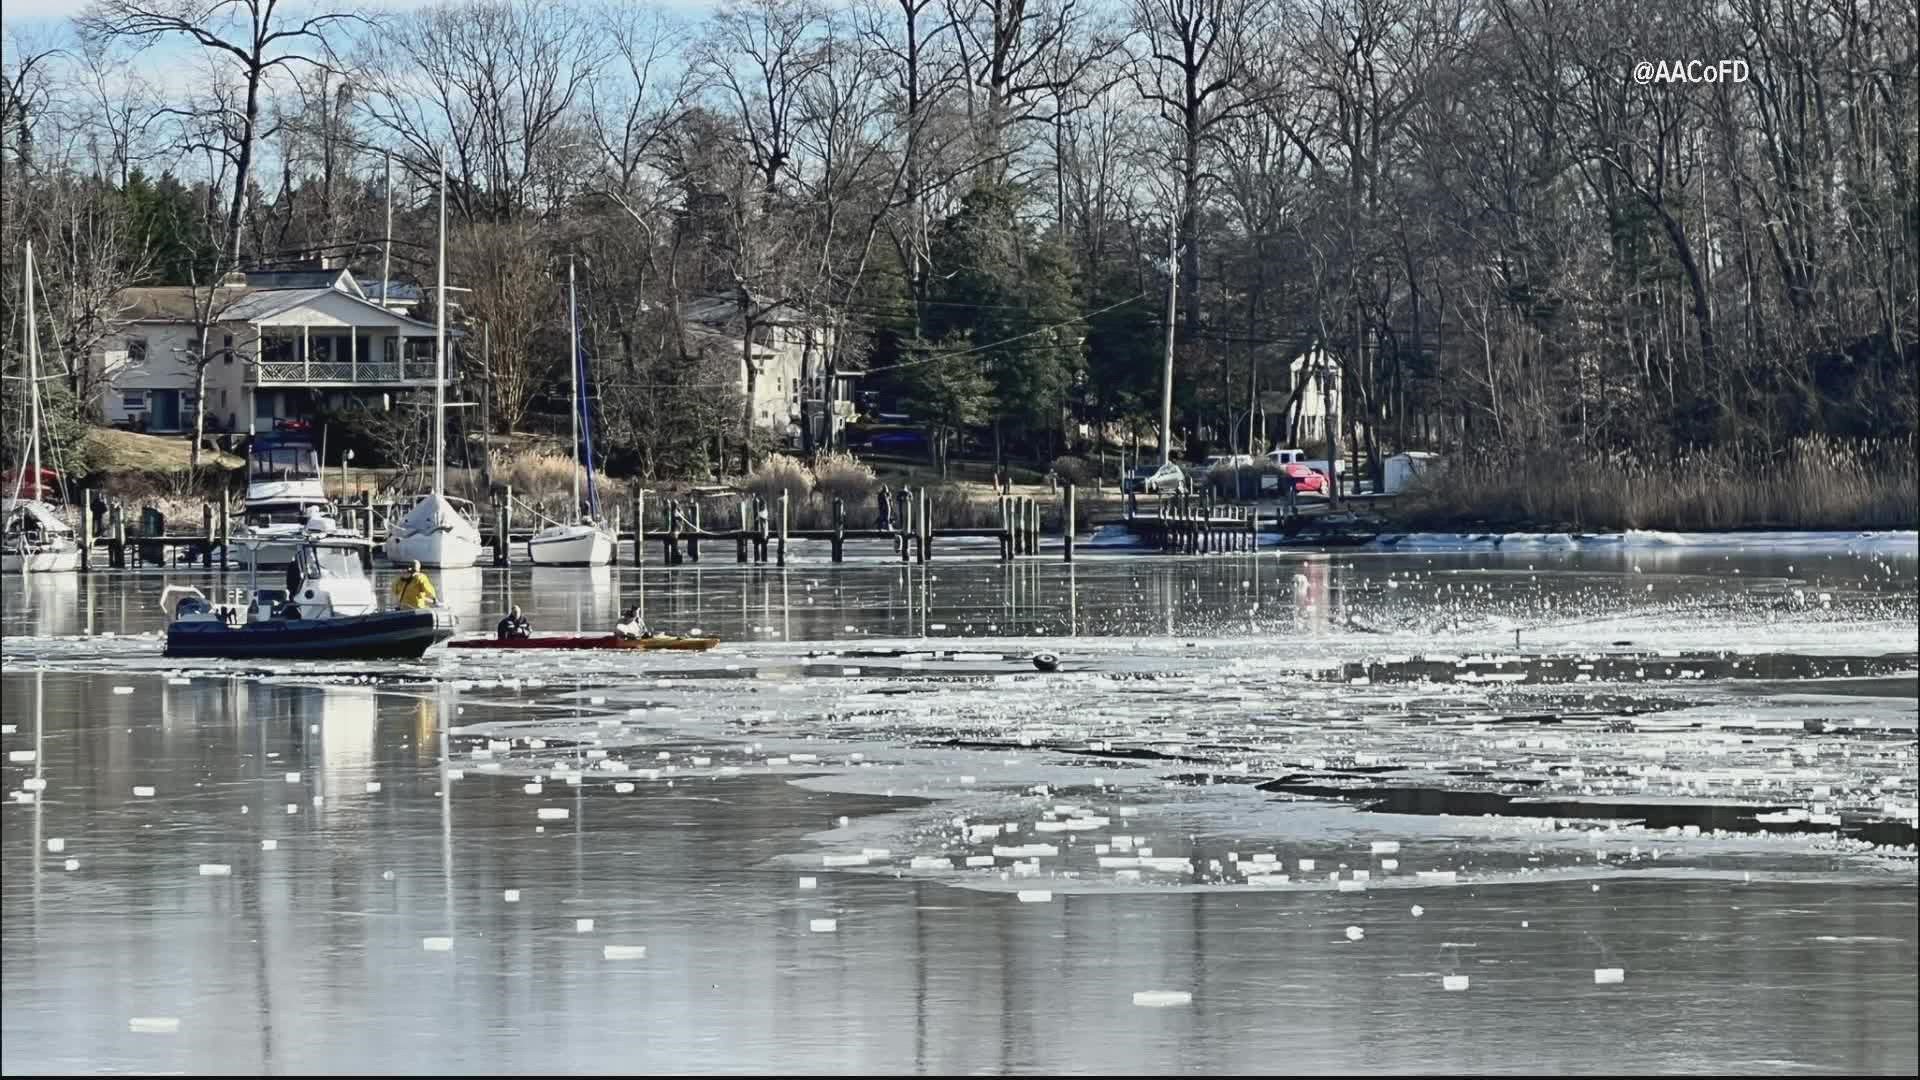 A small plane crash ran off its runway and crashed in the water in Anne Arundel County, Maryland on Monday morning, the Anne Arundel County Fire Department said.